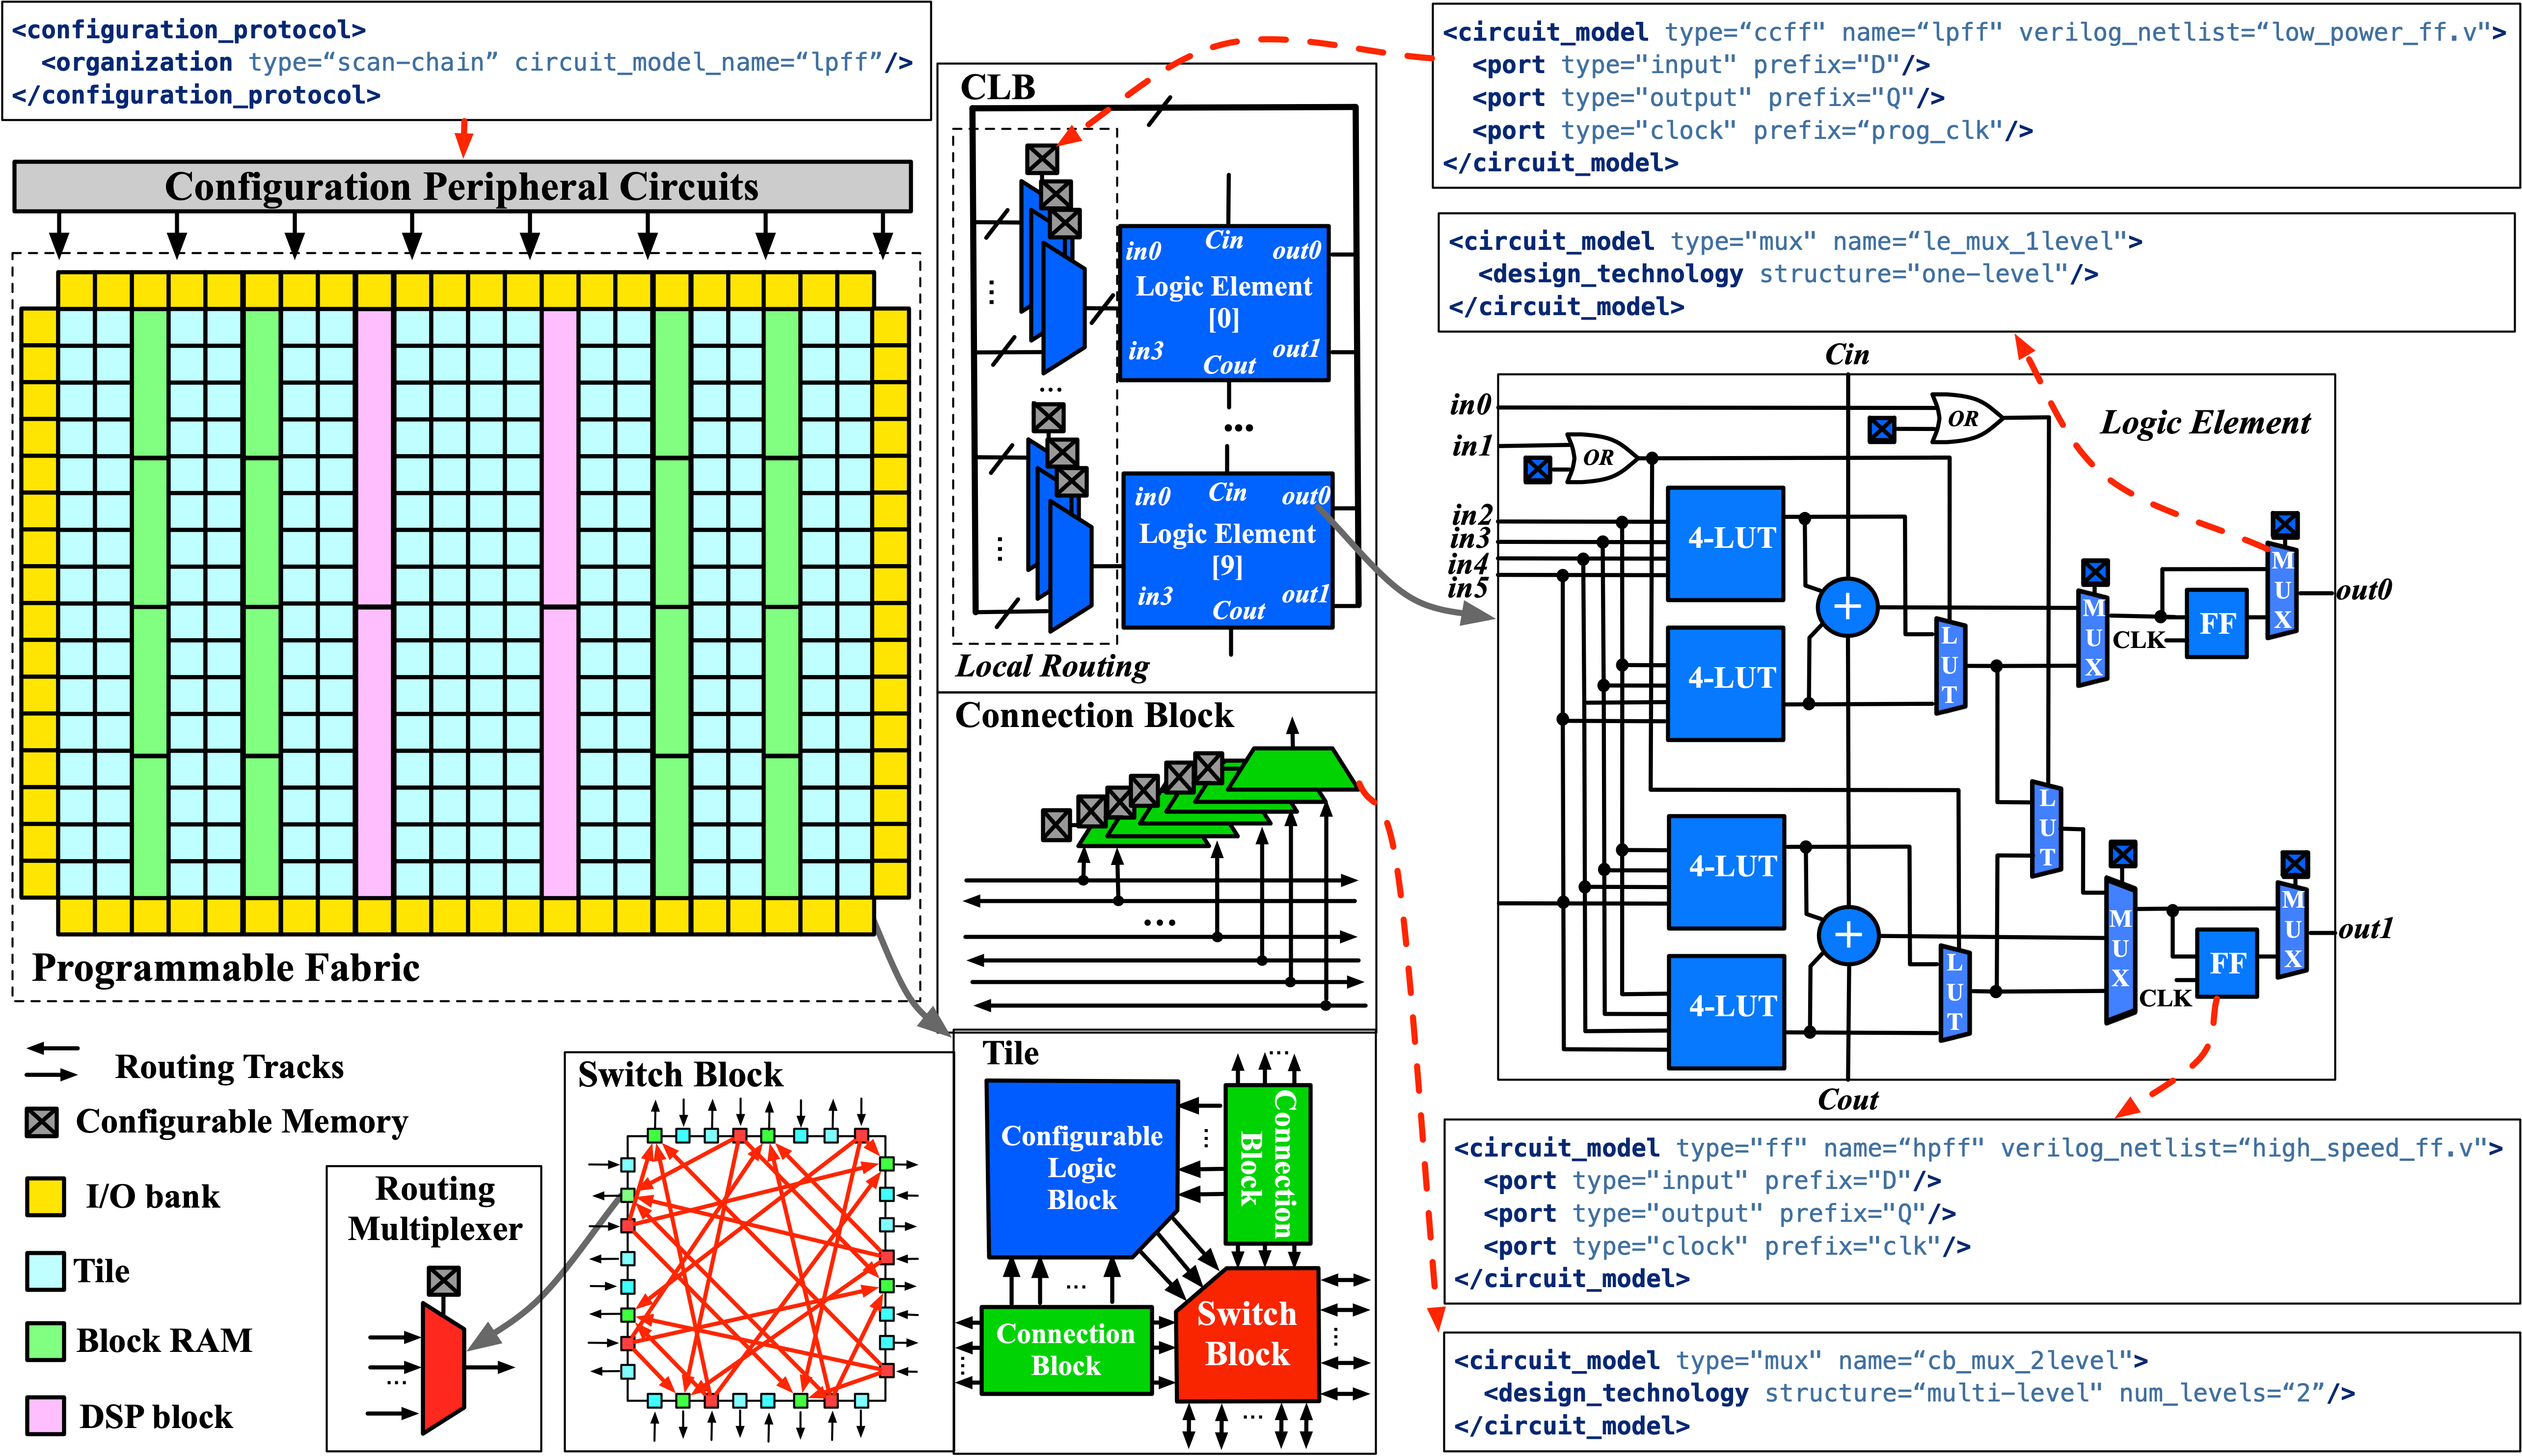 OpenFPGA architecture description language enabling fully customizable FPGA architecture and circuit-level implementation